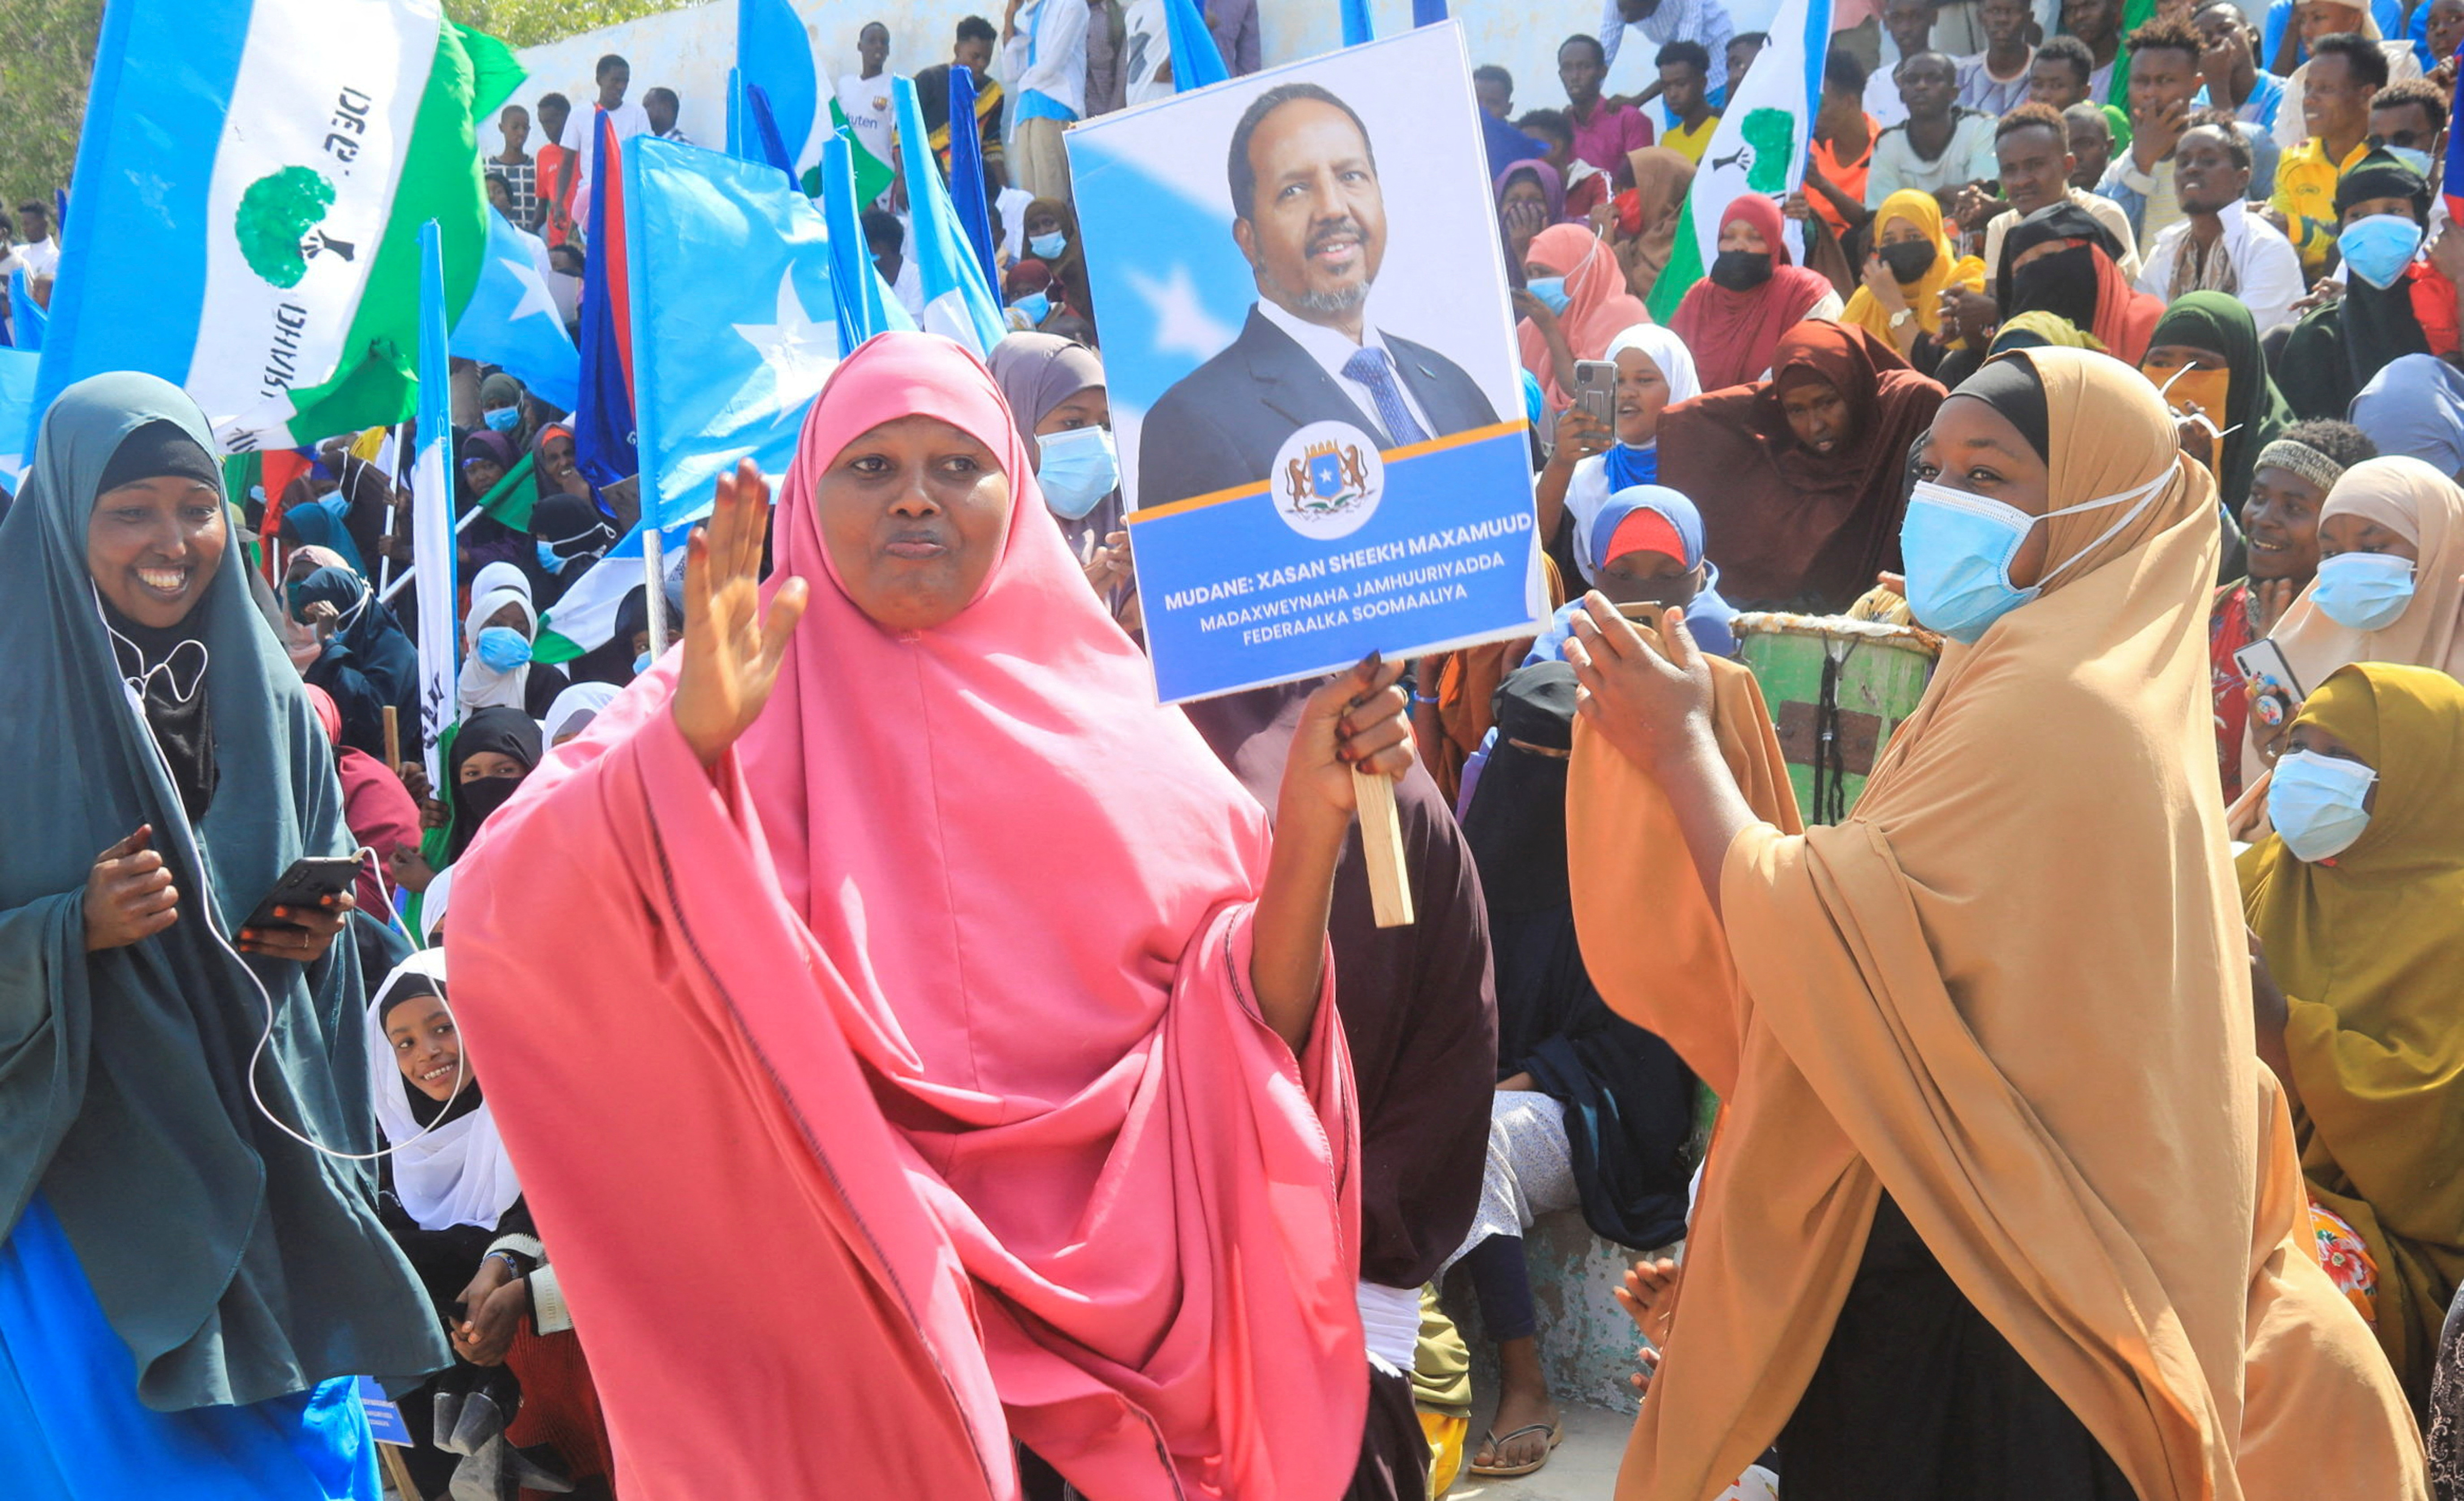 Residents attend a rally dubbed "Mogadishu People’s Uprising" in Mogadishu